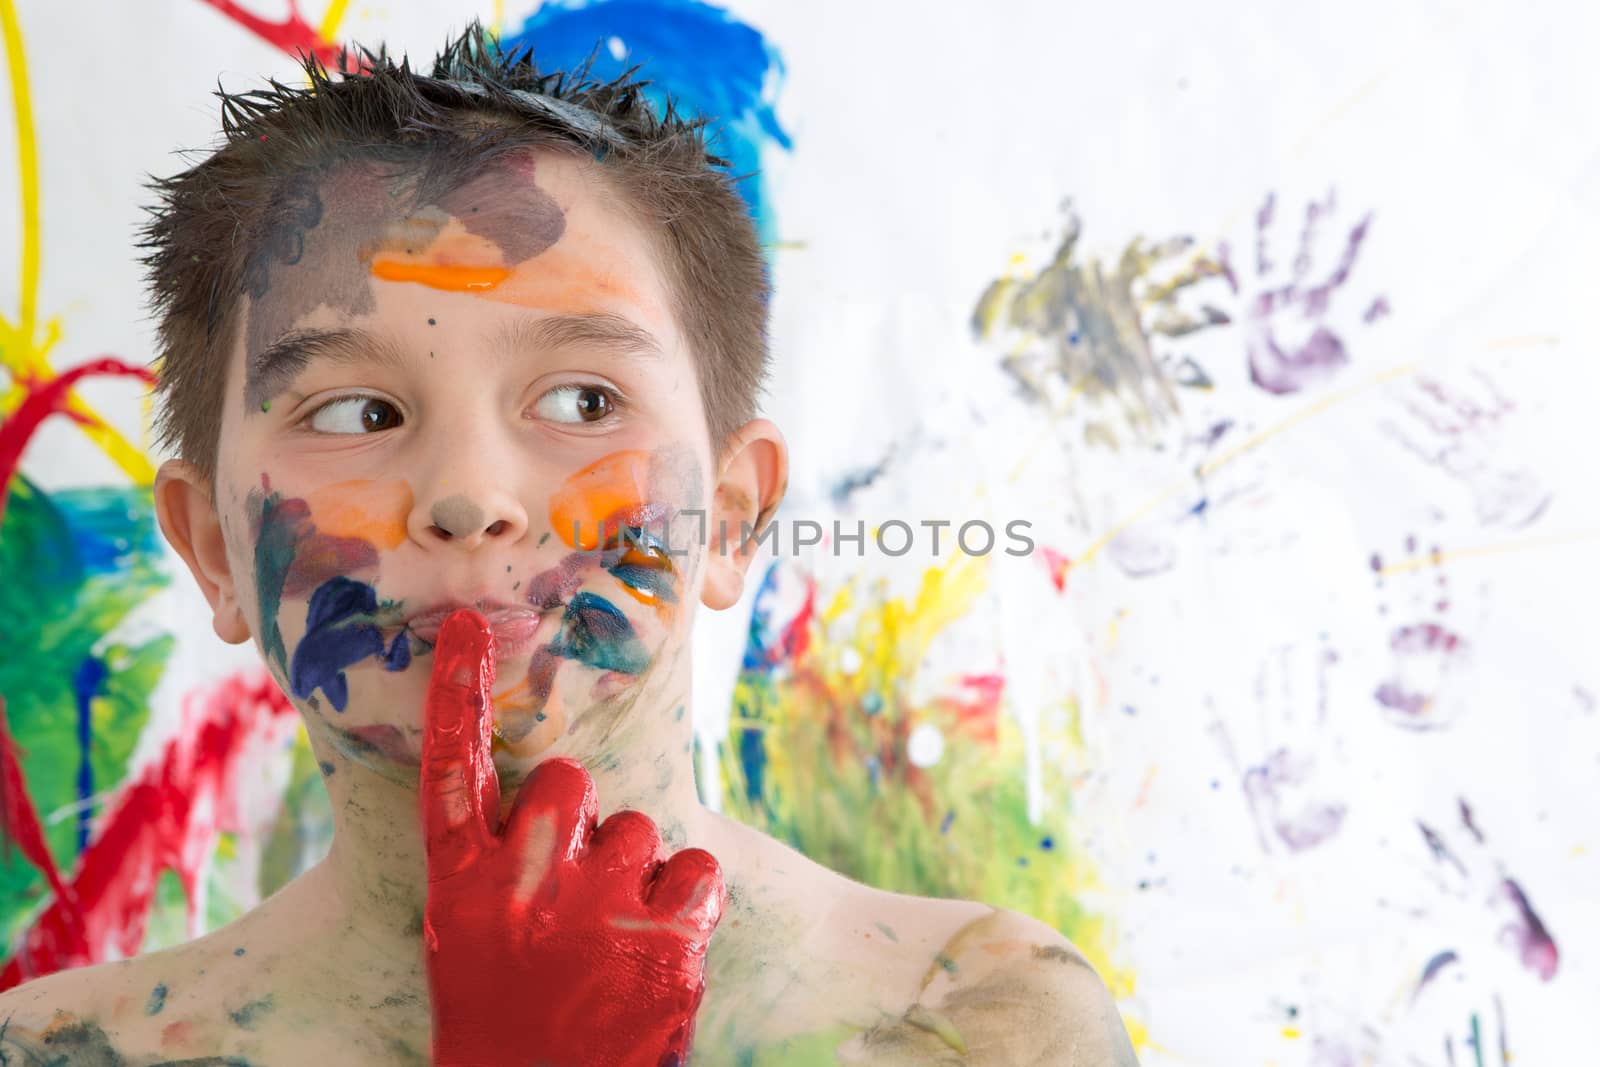 Thoughtful creative little boy covered in paint standing with his finger to his lips looking contemplatively to the side in front of his contemporary artwork as he seeks inspiration